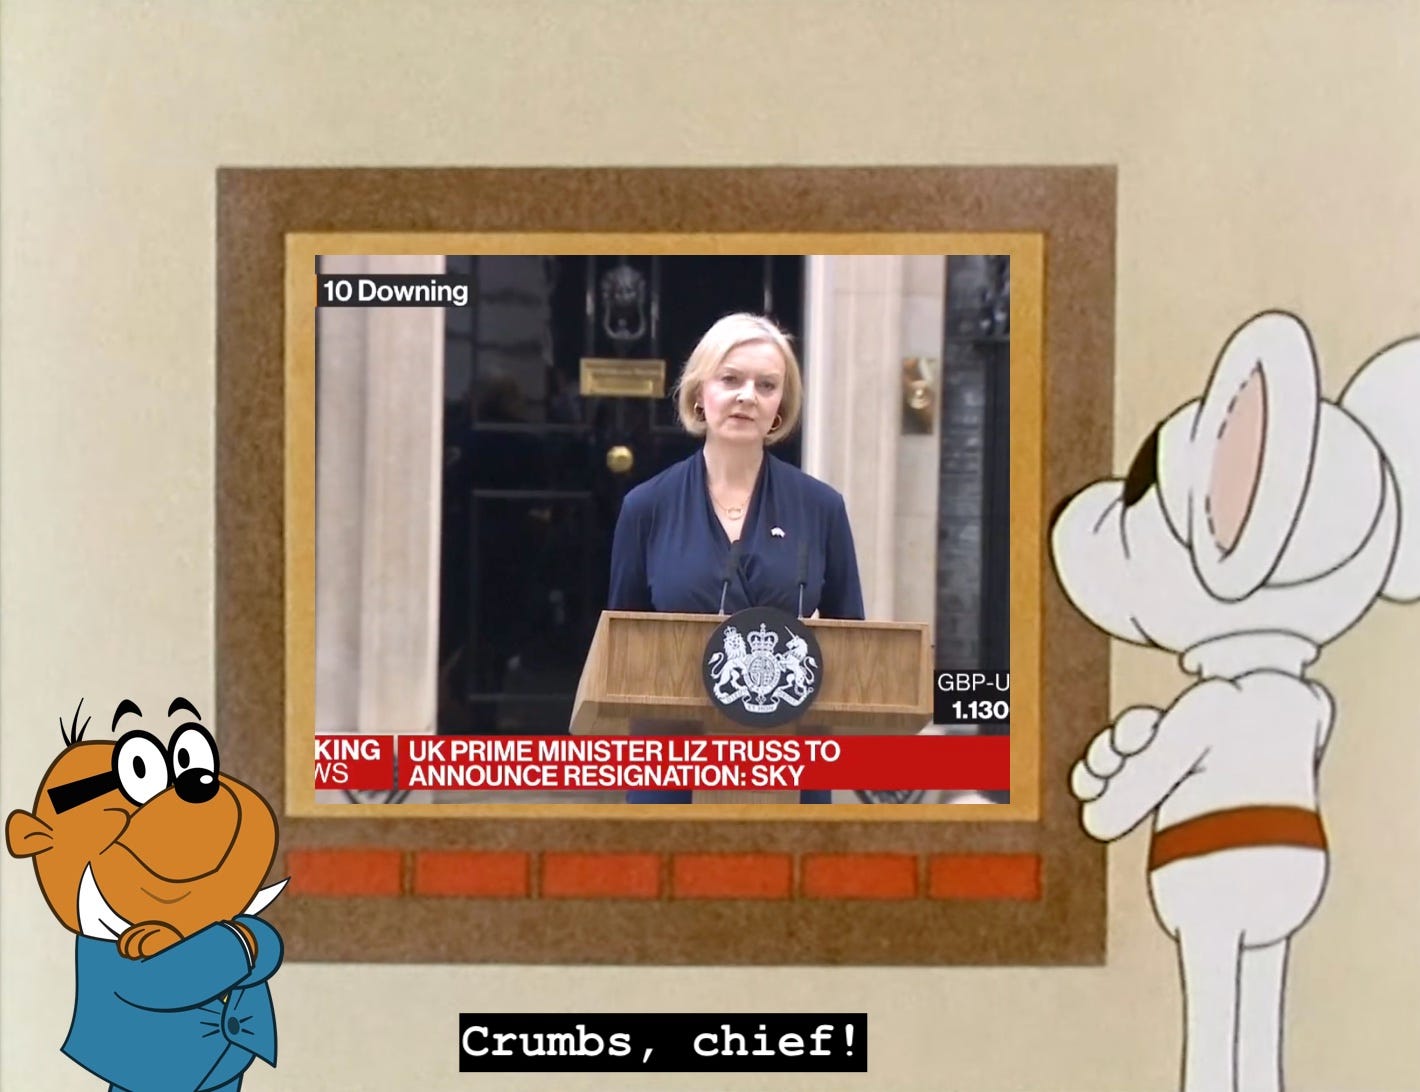 Danger Mouse and Penfold watch Liz Truss resign, as Penfold says his immortal catchphrase: "Crumbs, chief!" Did you know Penfold's first name is Ernest?